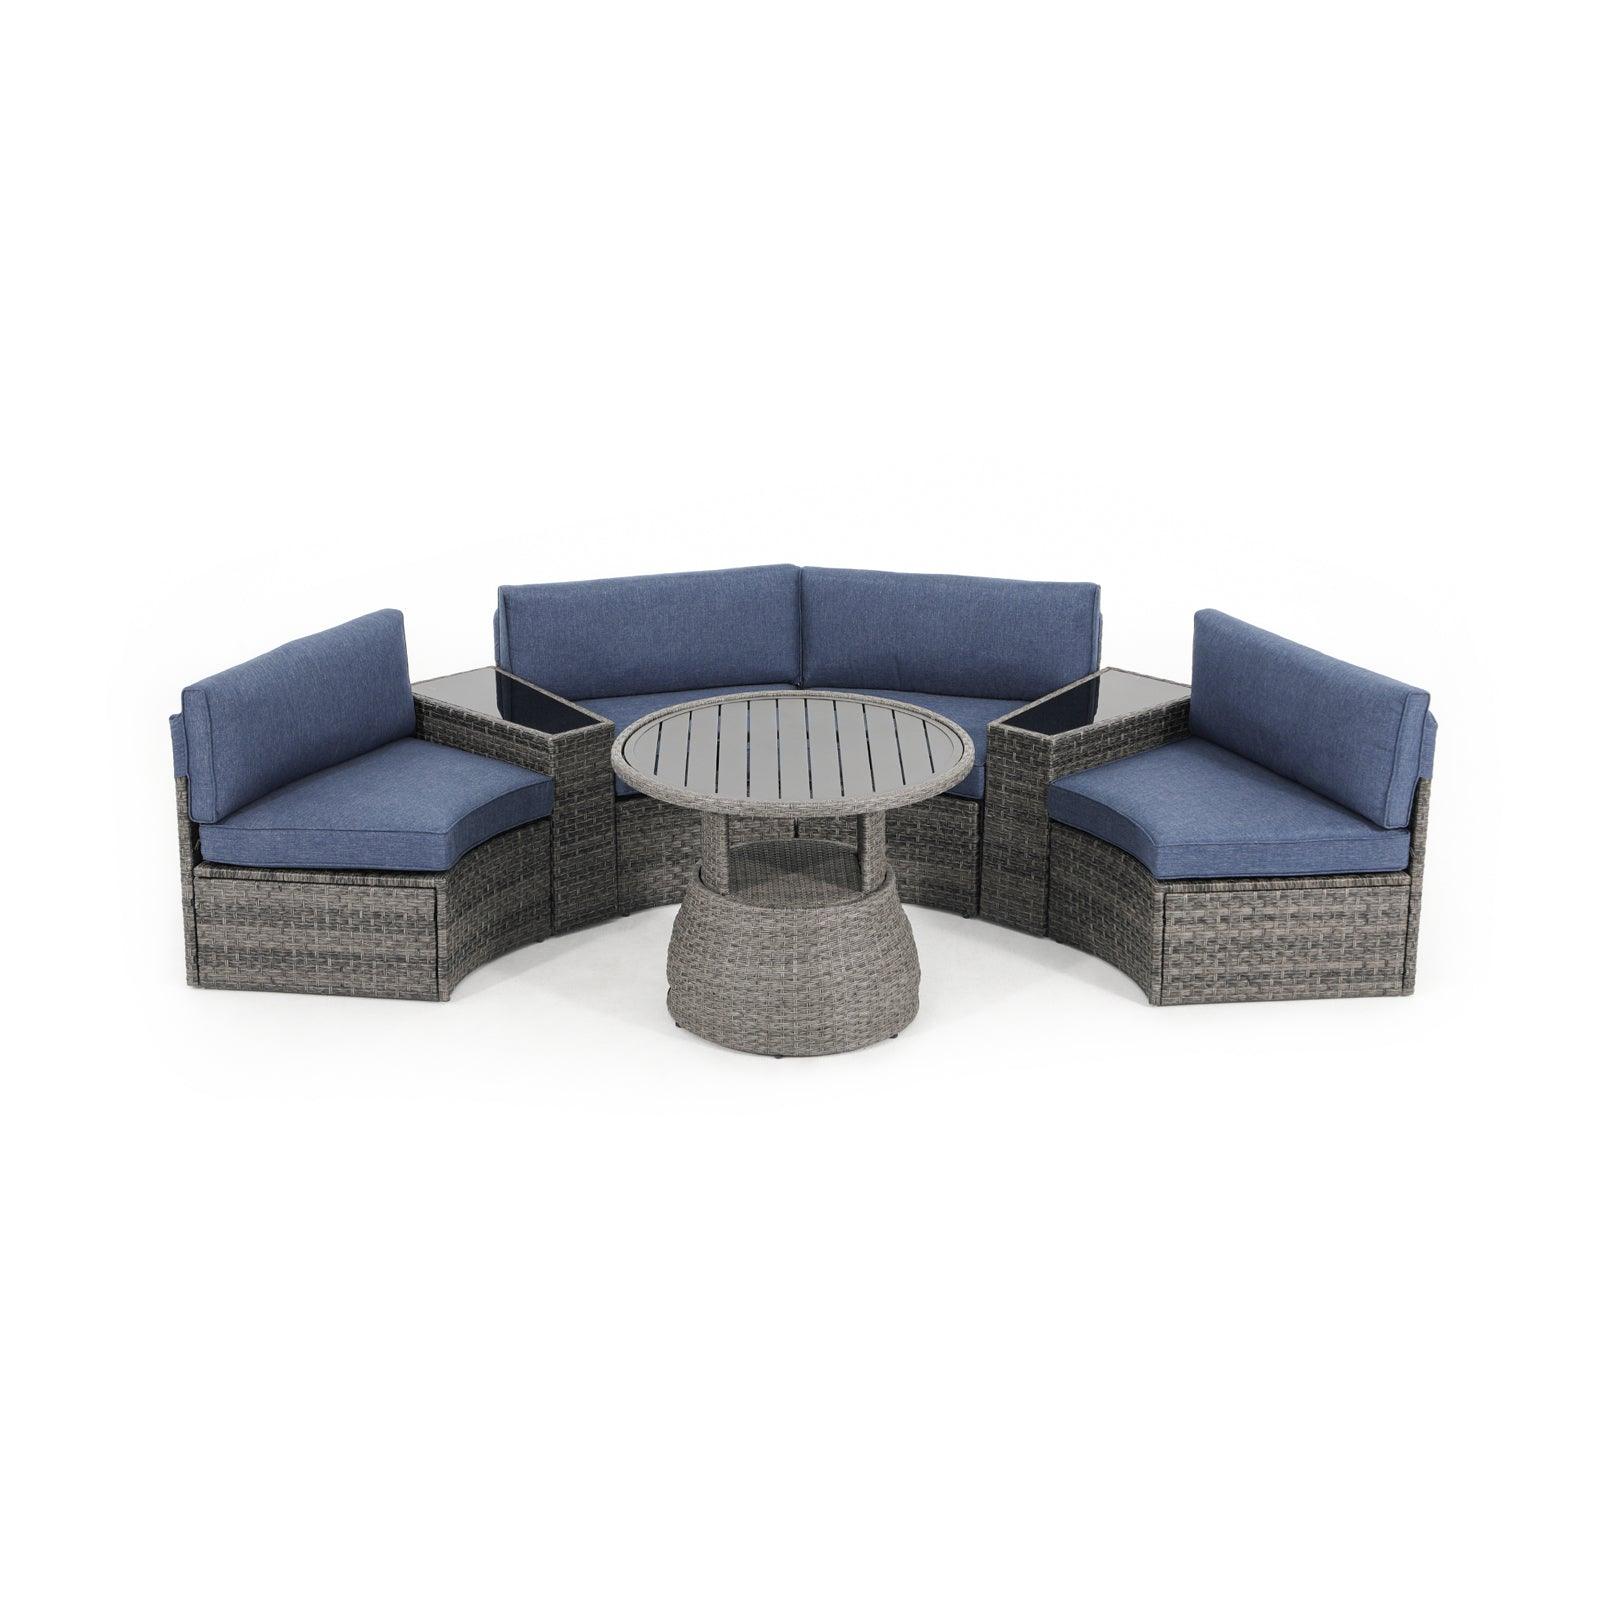 Boboli grey wicker Curved Sectional sofa set with navy blue cushions + 2 side tables + 1 Lift-top grey wicker round table - Jardina Furniture#color_Navy Blue#piece_7-pc.